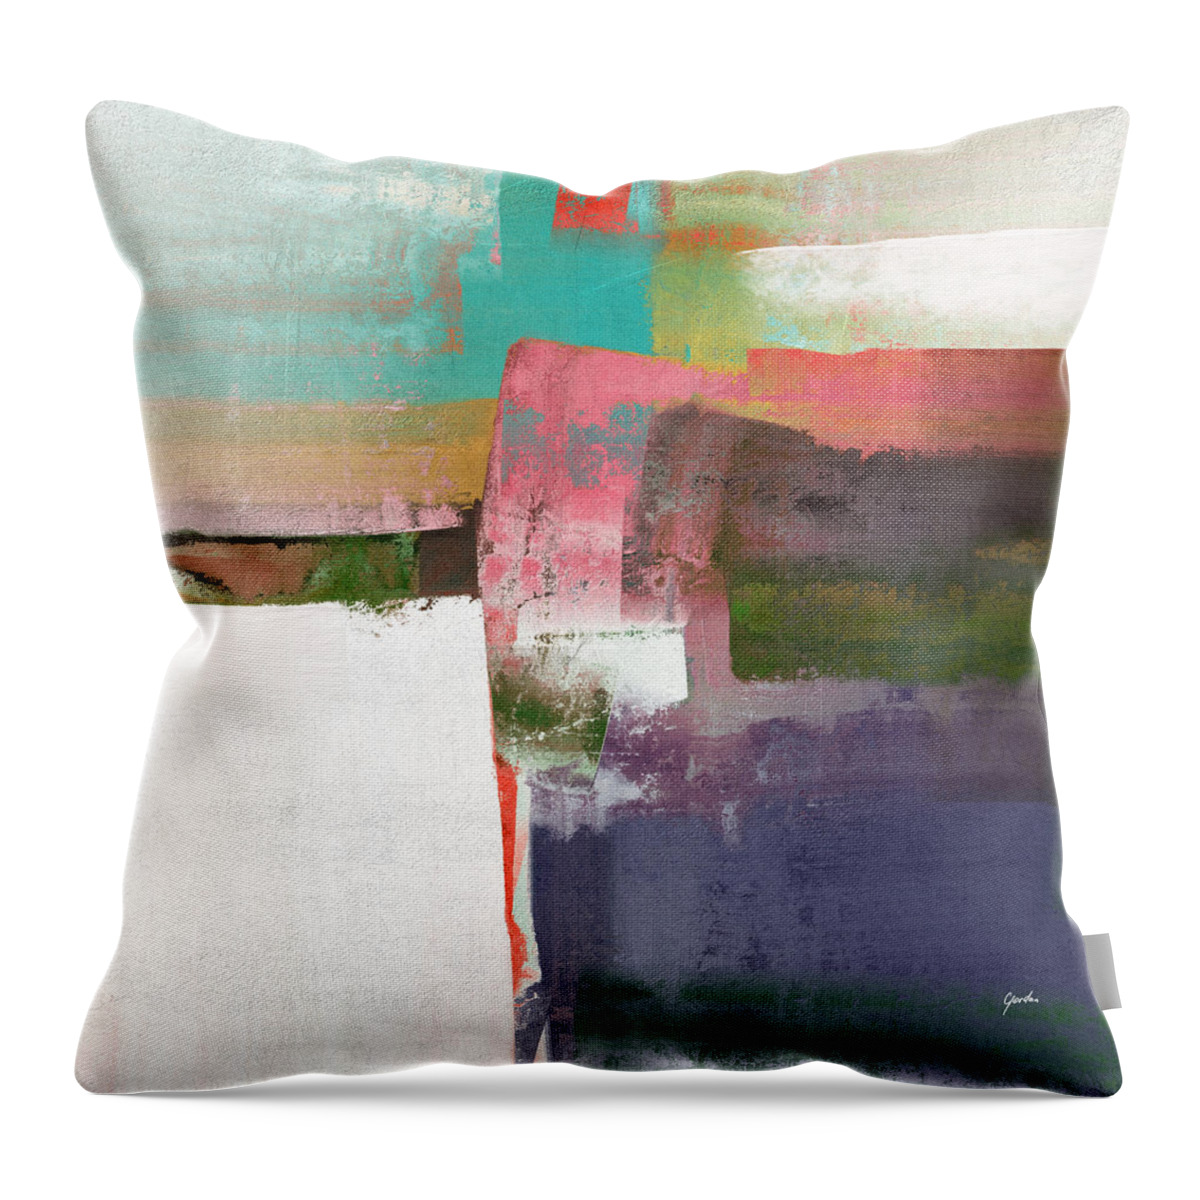 Abstract Throw Pillow featuring the painting Countryside Autumn - Abstract Landscape Painting by iAbstractArt